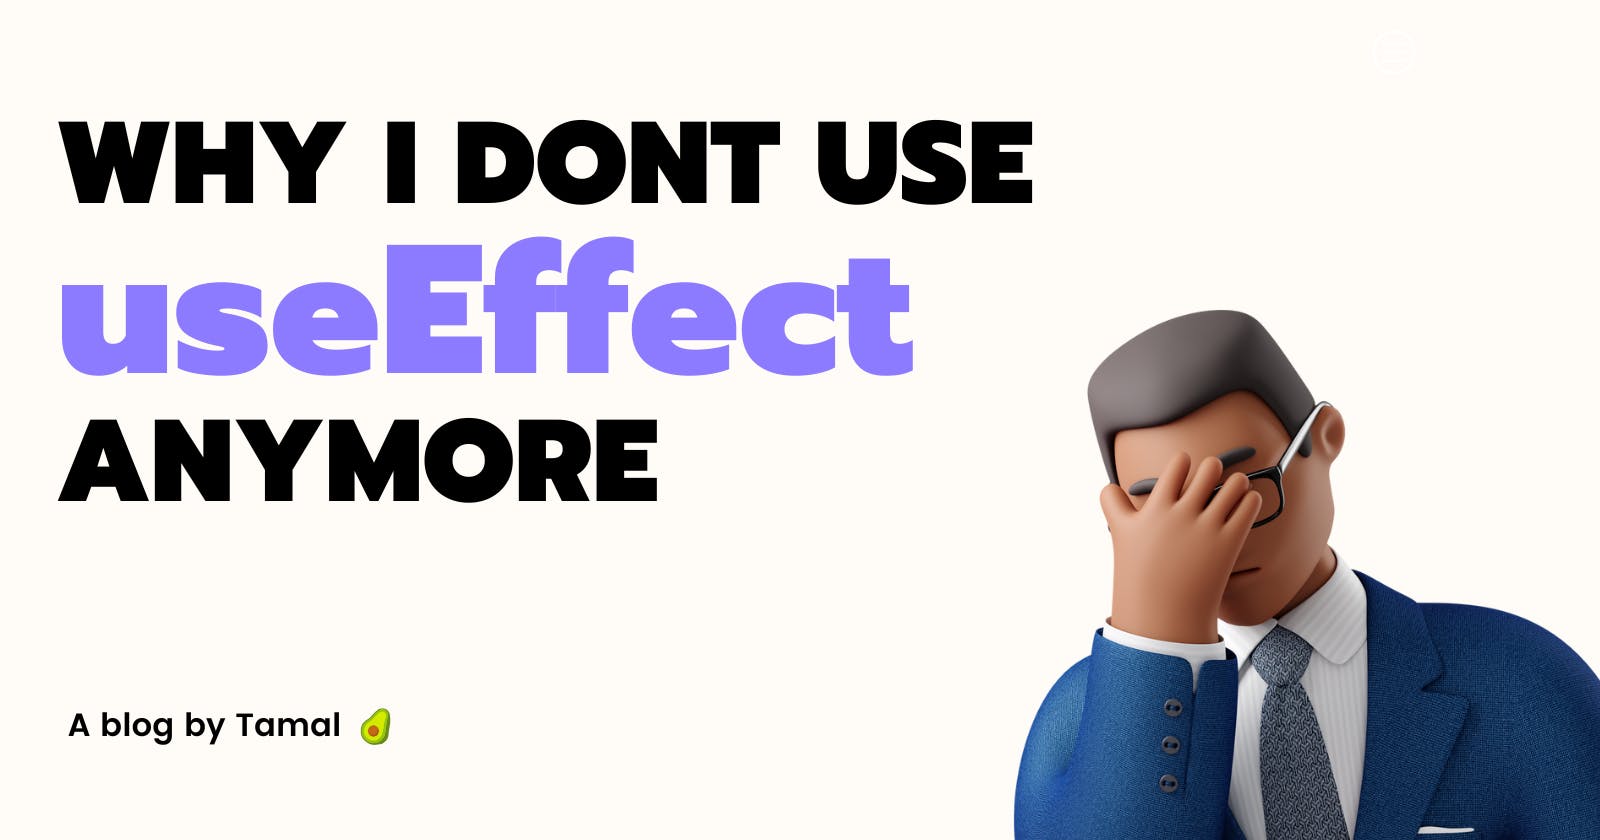 Don't fetch data with useEffect, use this instead 👇